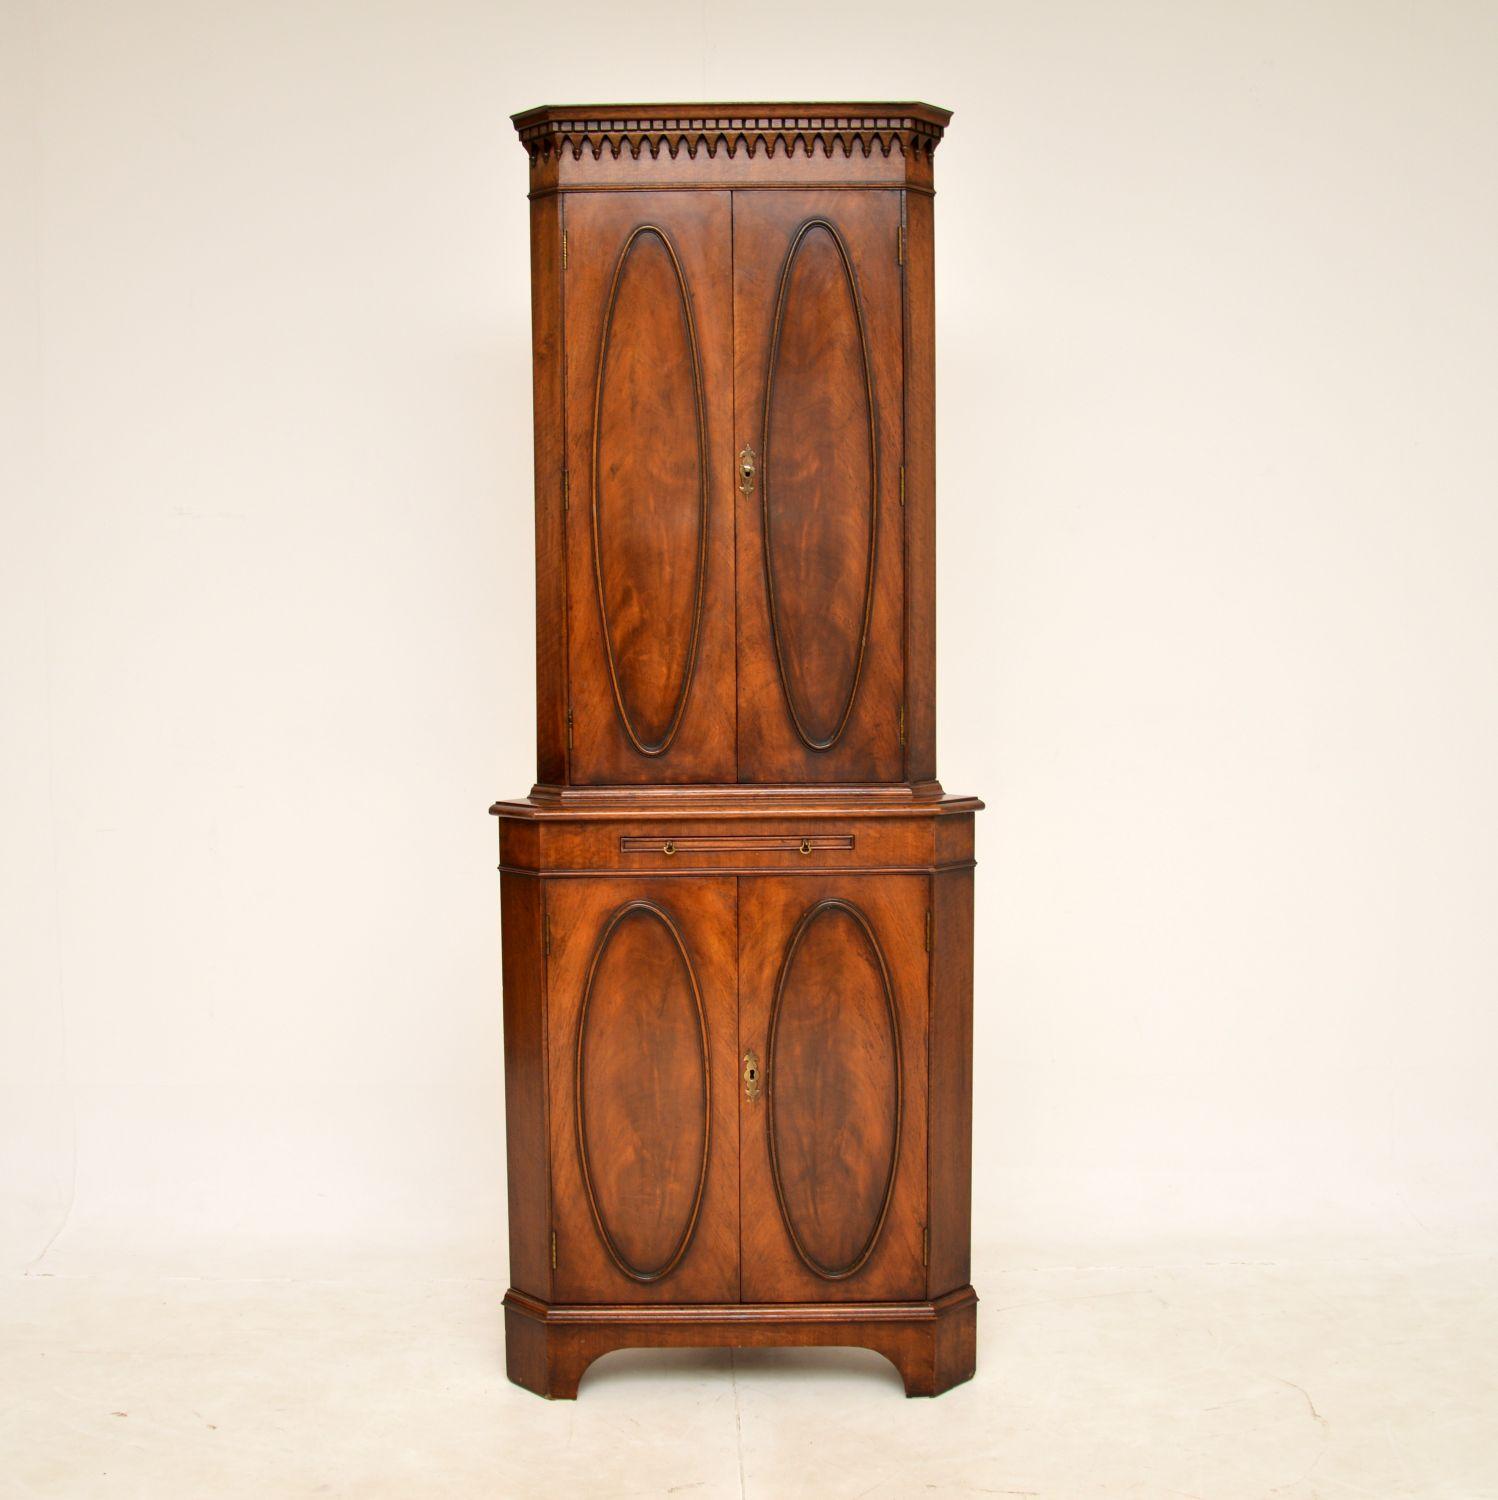 A smart and very well made antique corner cabinet in the Georgian style. This was made in England, it dates from around the 1930-50’s.

It is of excellent quality and is a very useful item. There are beautiful grain patterns, this has oval